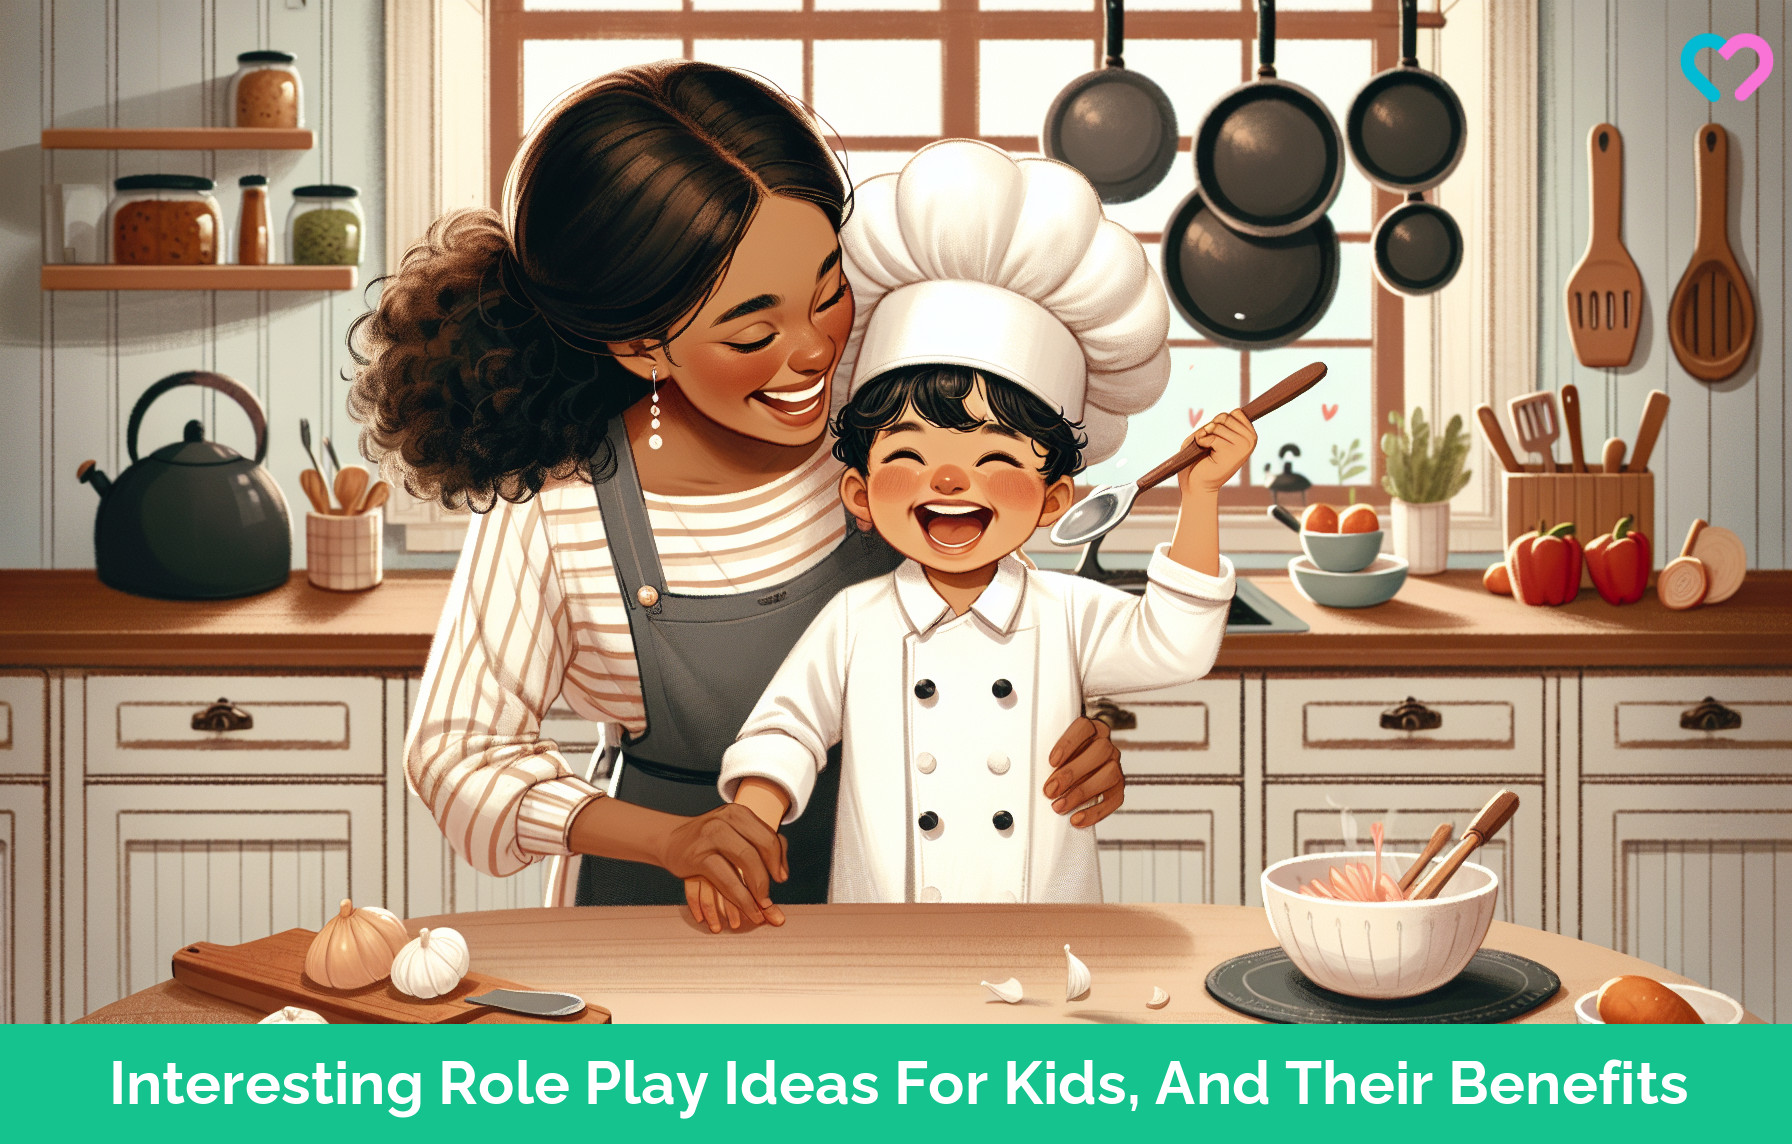 Role Play Ideas For Kids_illustration